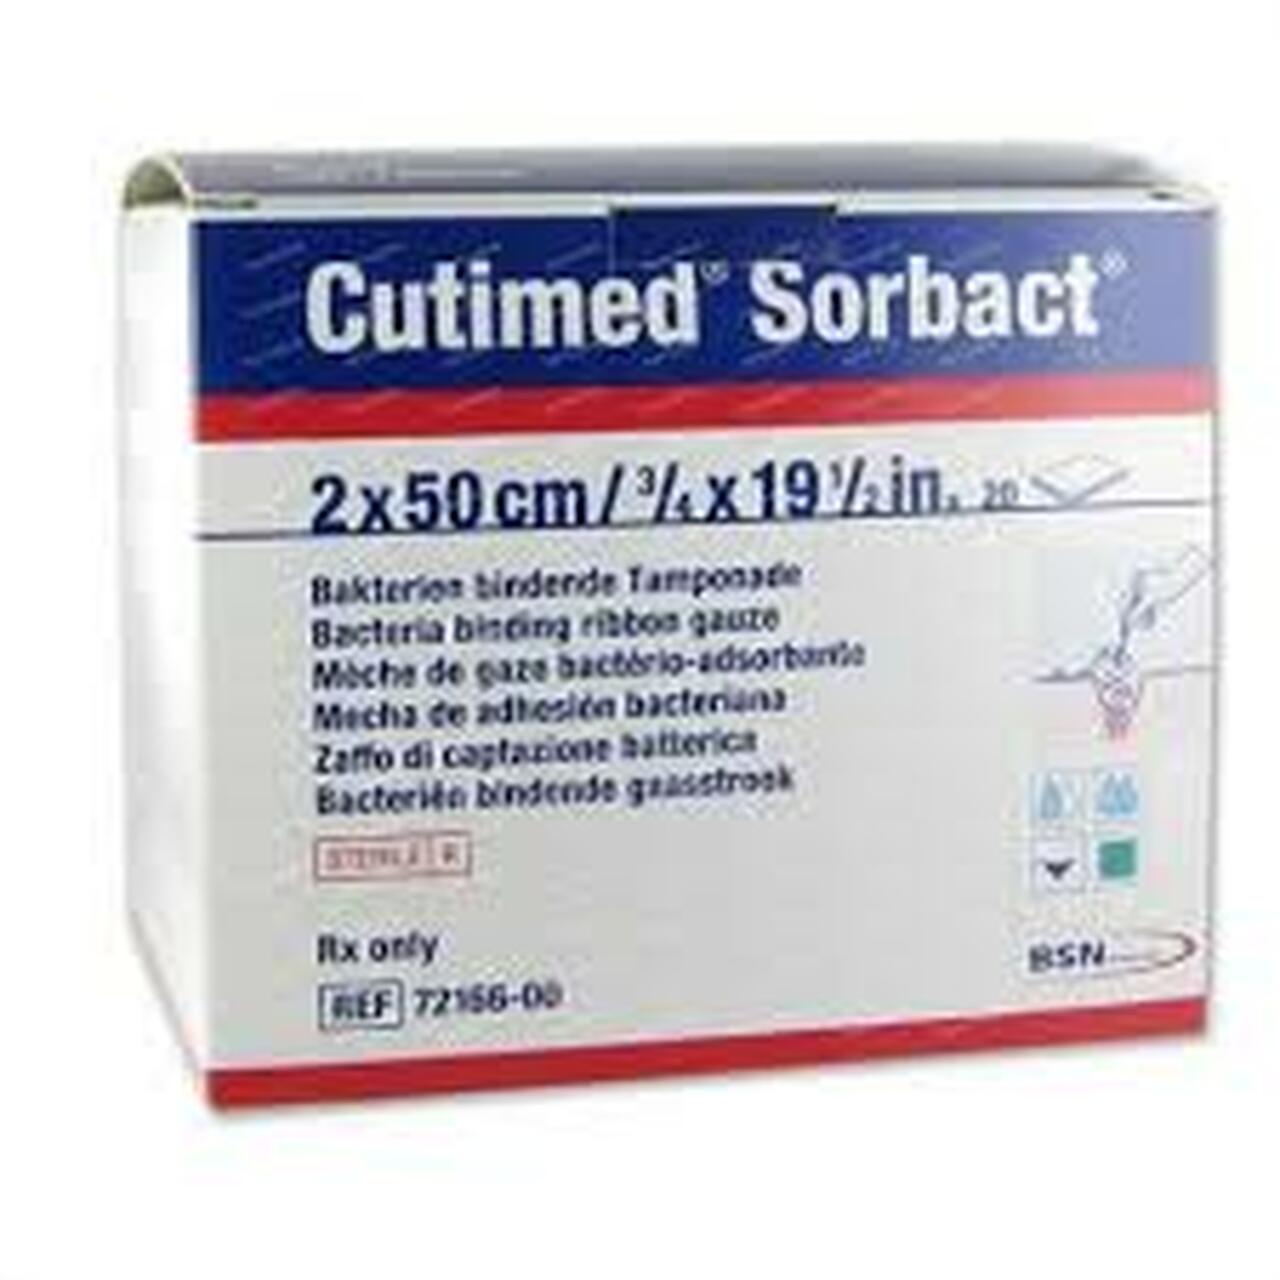 Cutimed Sorbact Antimicrobial Dressing W/Bacteria Binding Action 4cm X6cm - Box Of 5 - Home Health Store Inc